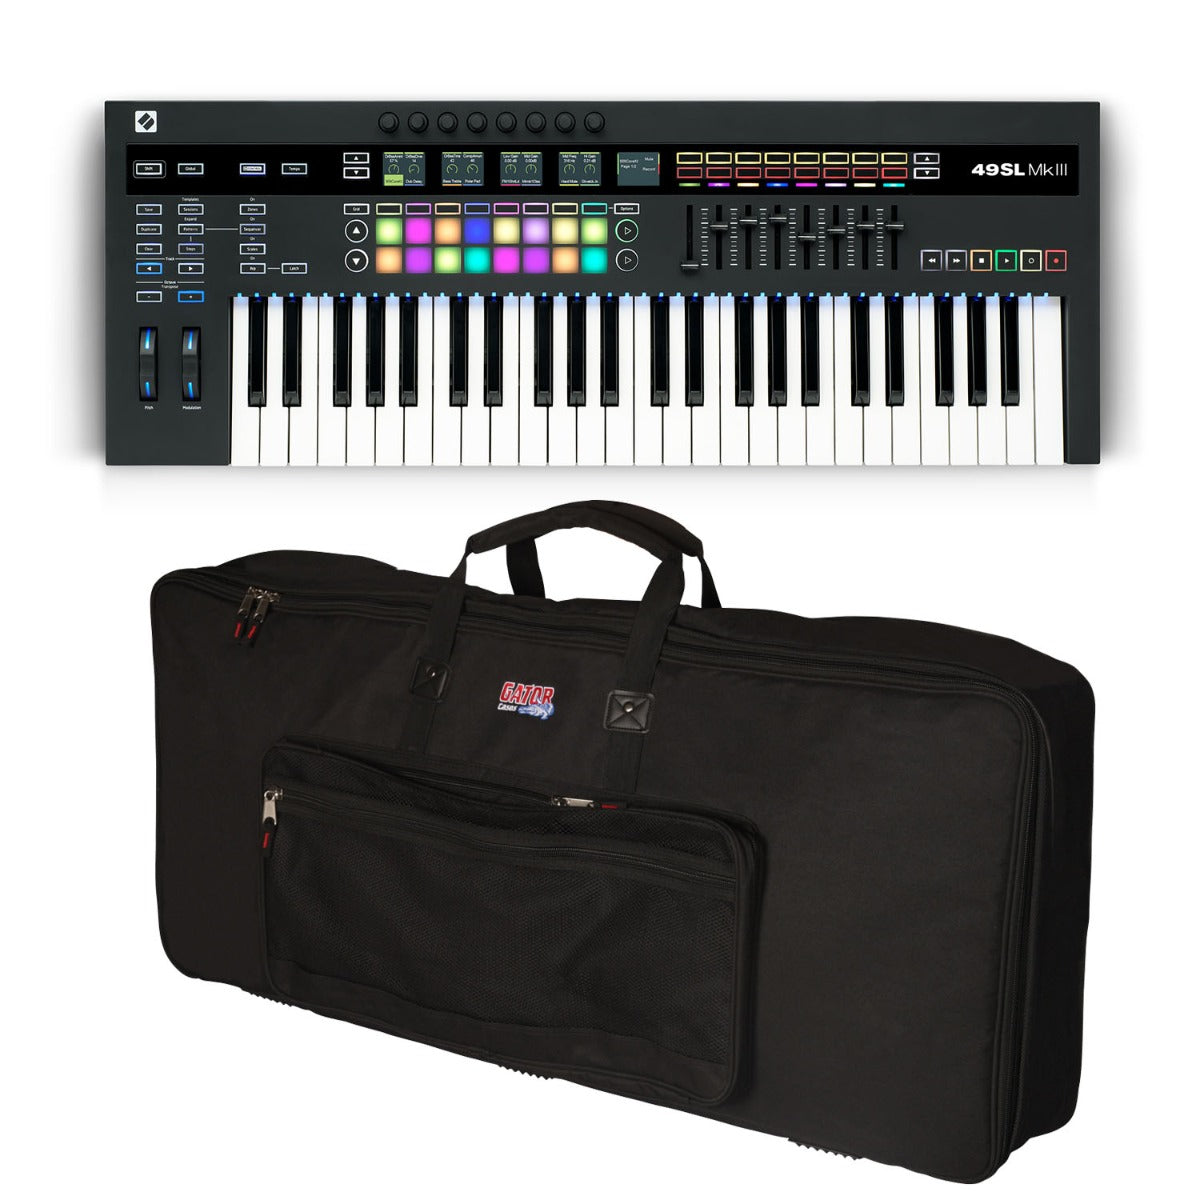 Novation 49SL MKIII Keyboard Controller and Sequencer CARRY BAG